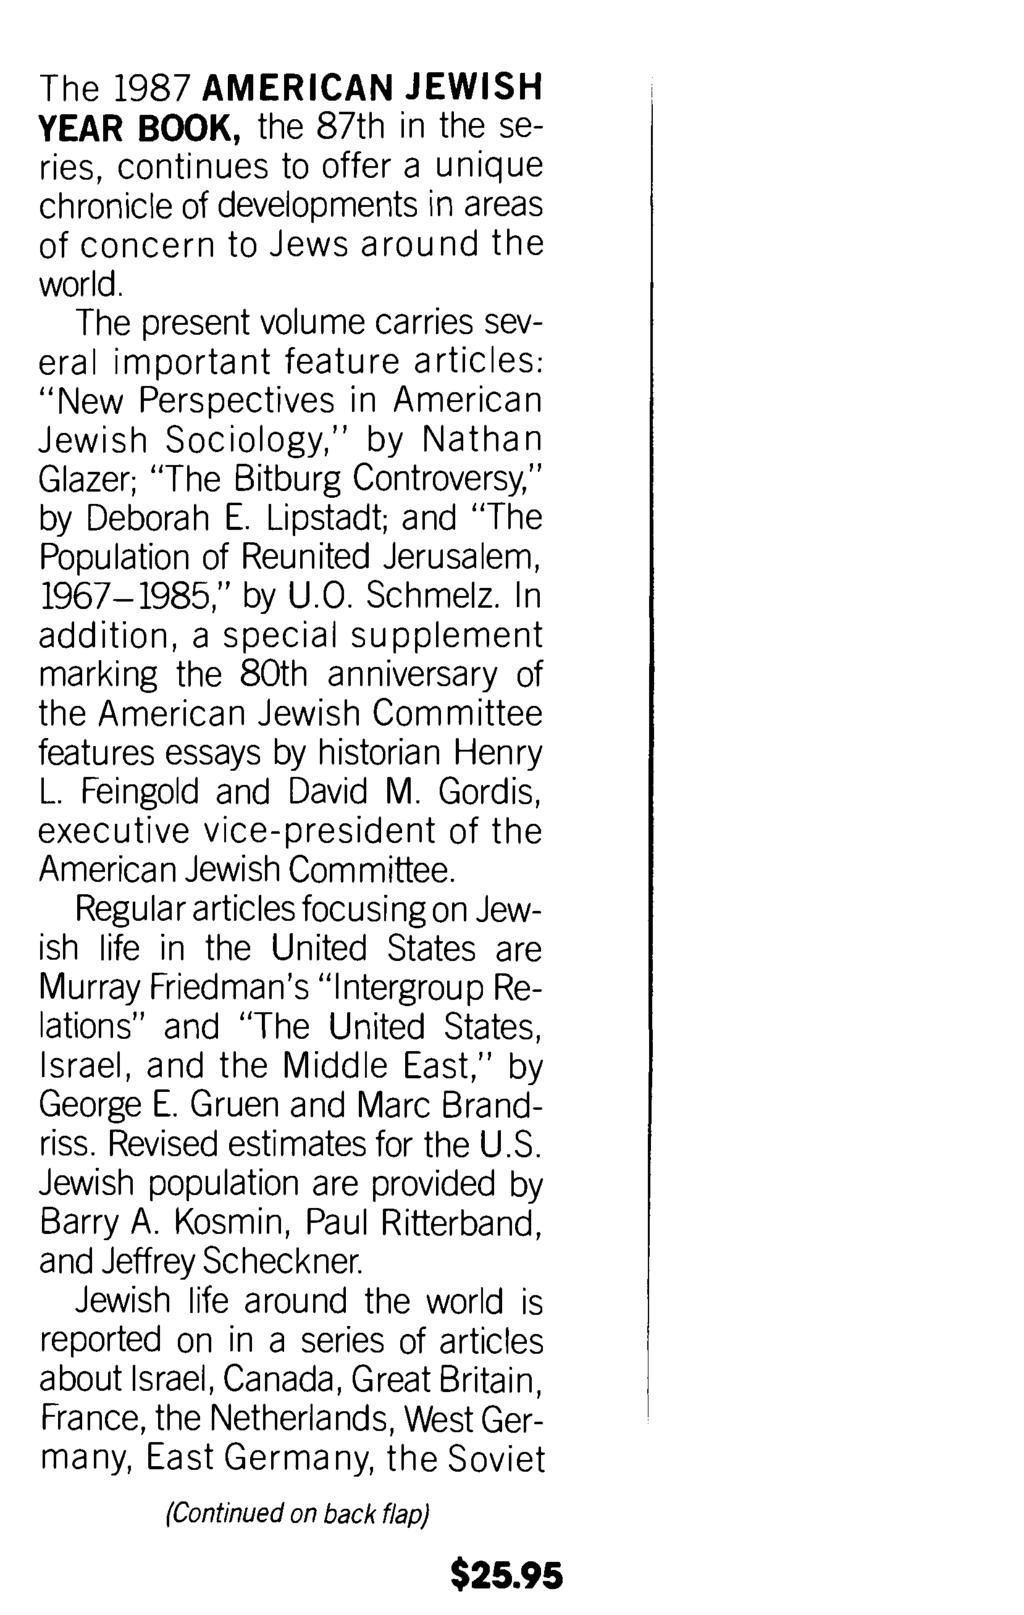 The 1987 AMERICAN JEWISH YEAR BOOK, the 87th in the series, continues to offer a unique chronicle of developments in areas of concern to Jews around the world.